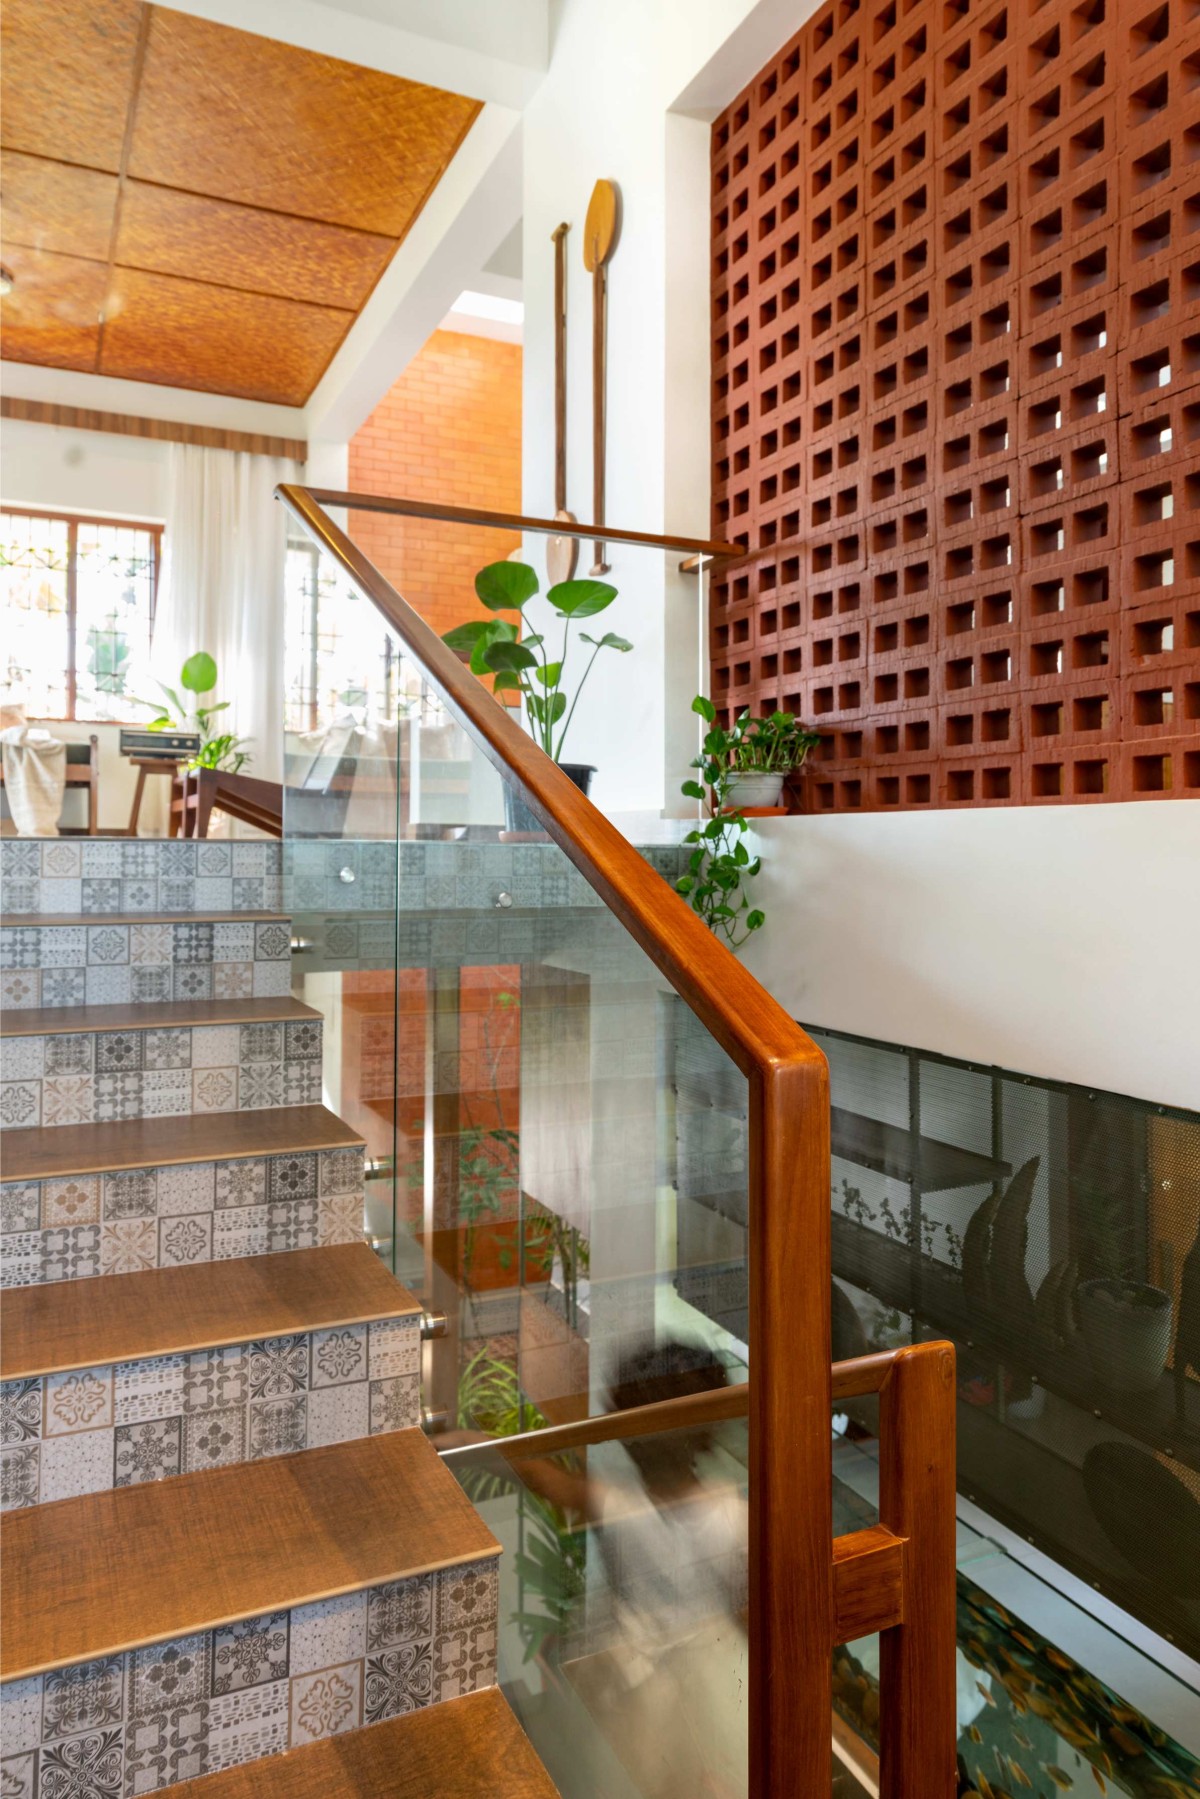 Staircase of House of Earthy Hues by Urbane Ivy